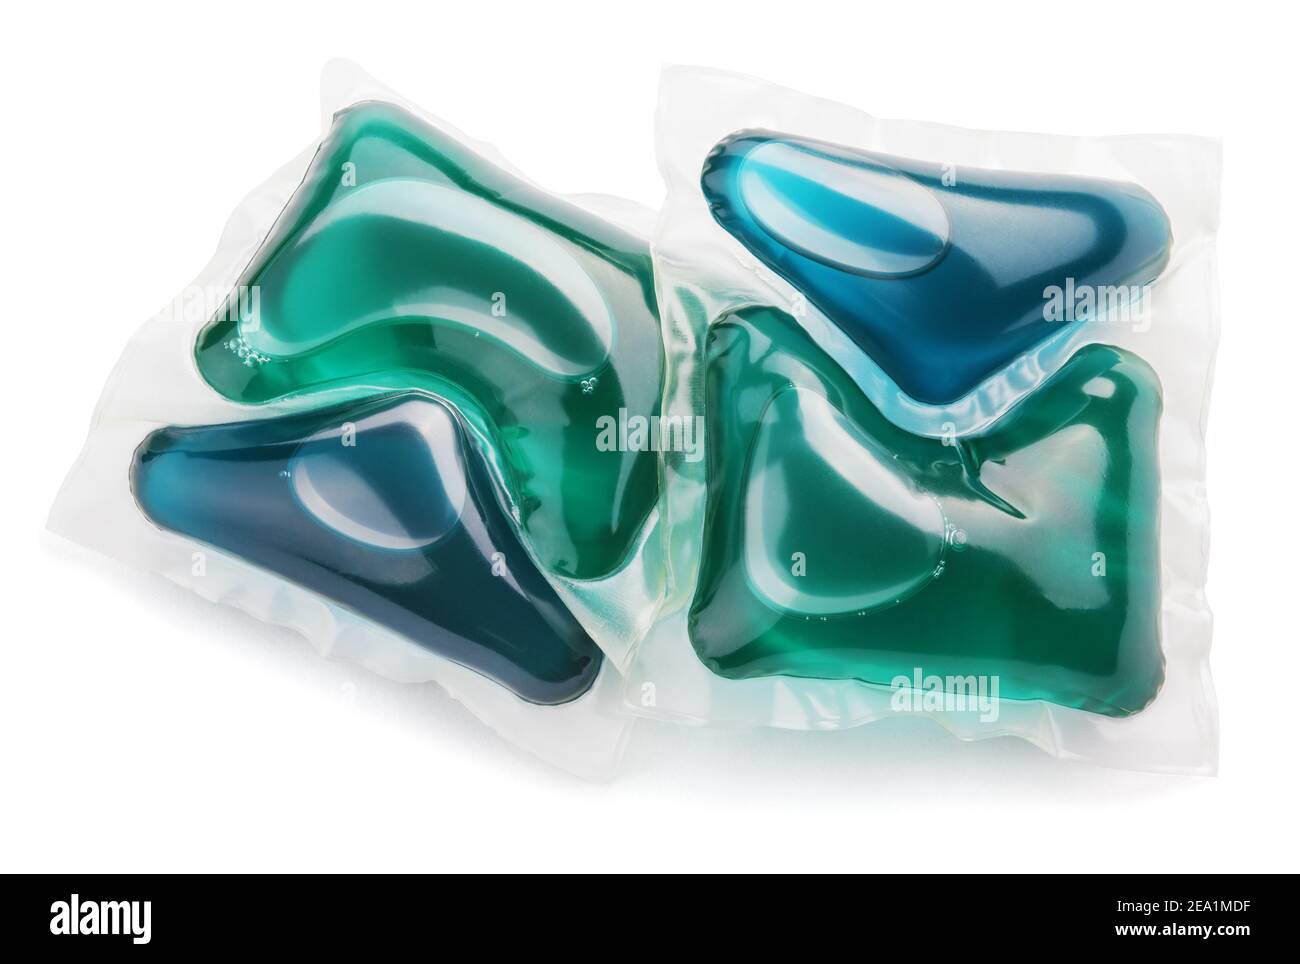 Two washing gel capsule pods with laundry detergent isolated on white background with clipping path Stock Photo